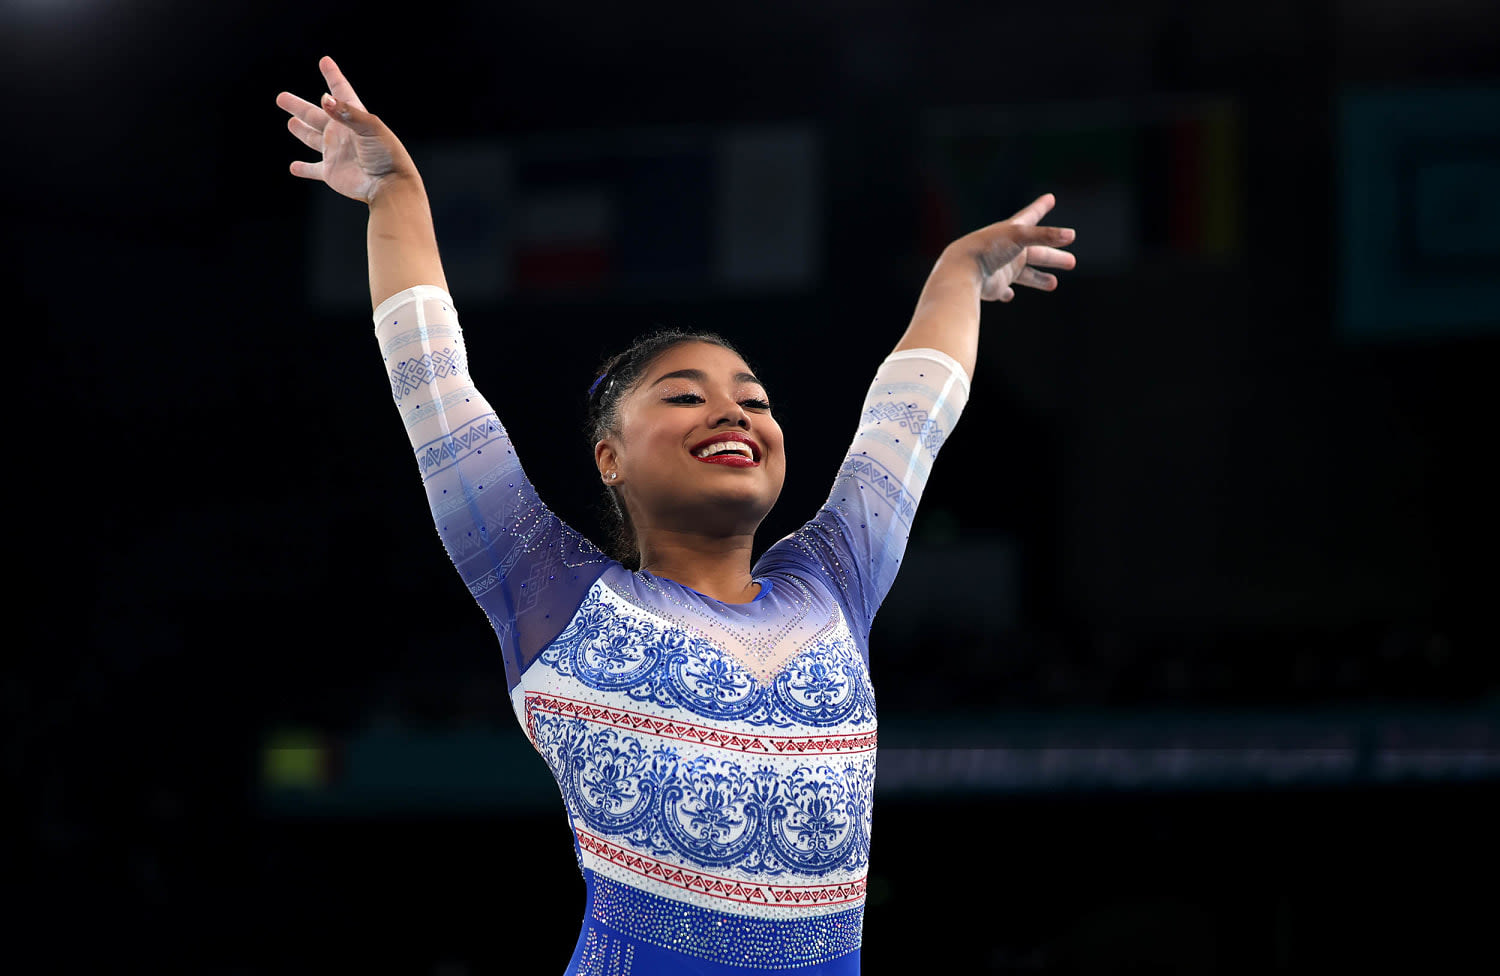 Meet Hillary Heron — the only other gymnast besides Simone Biles to land this move at the Olympics